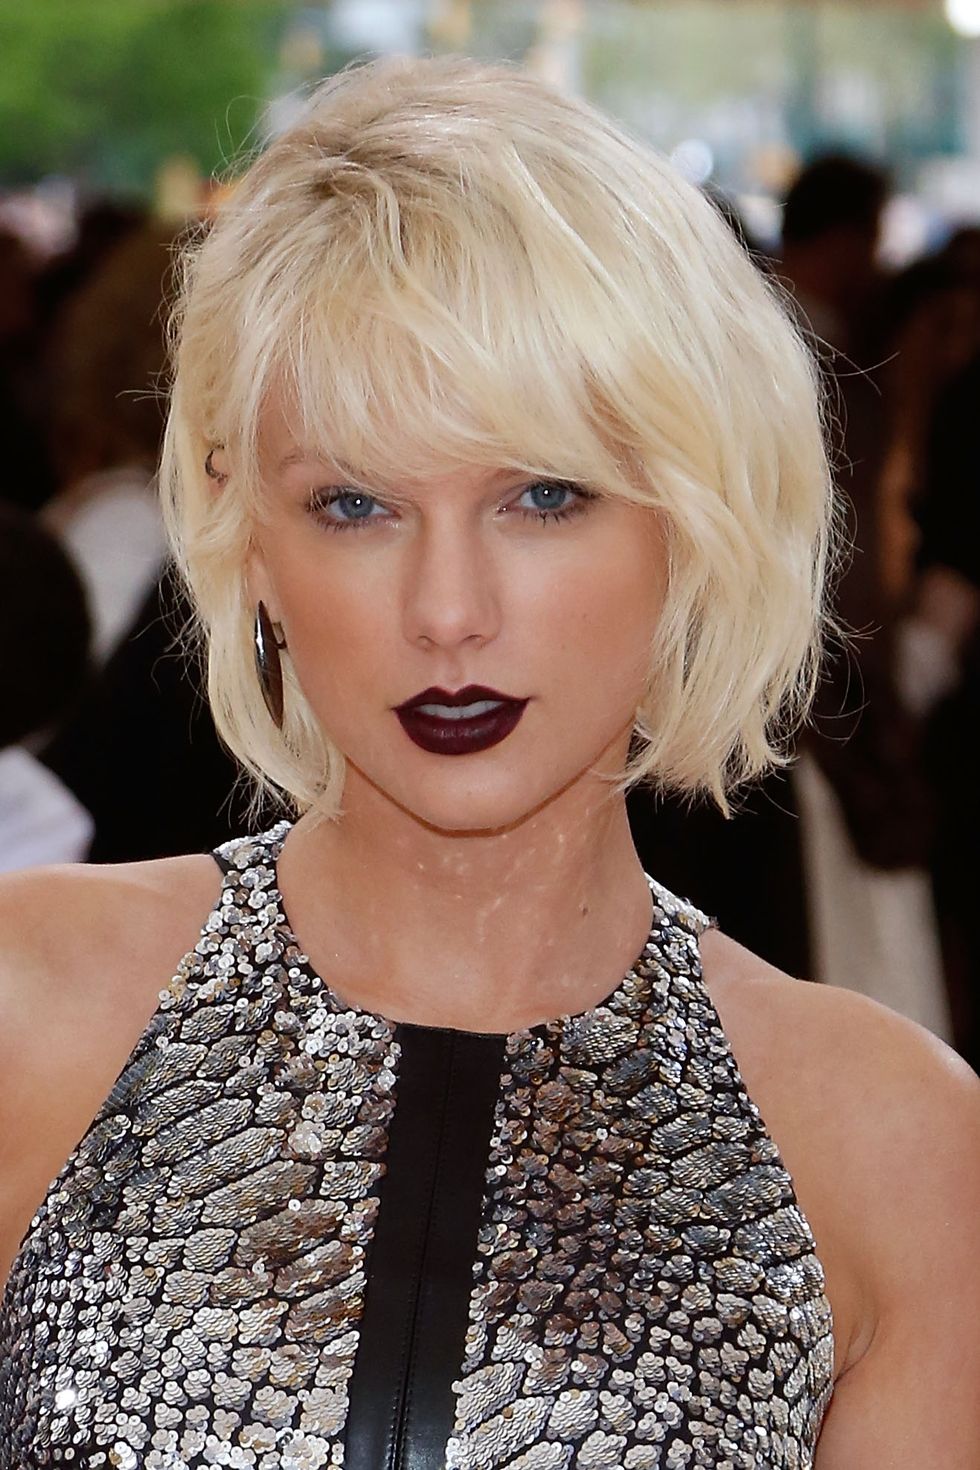 Taylor Swift's makeup for the MET Gala 2016